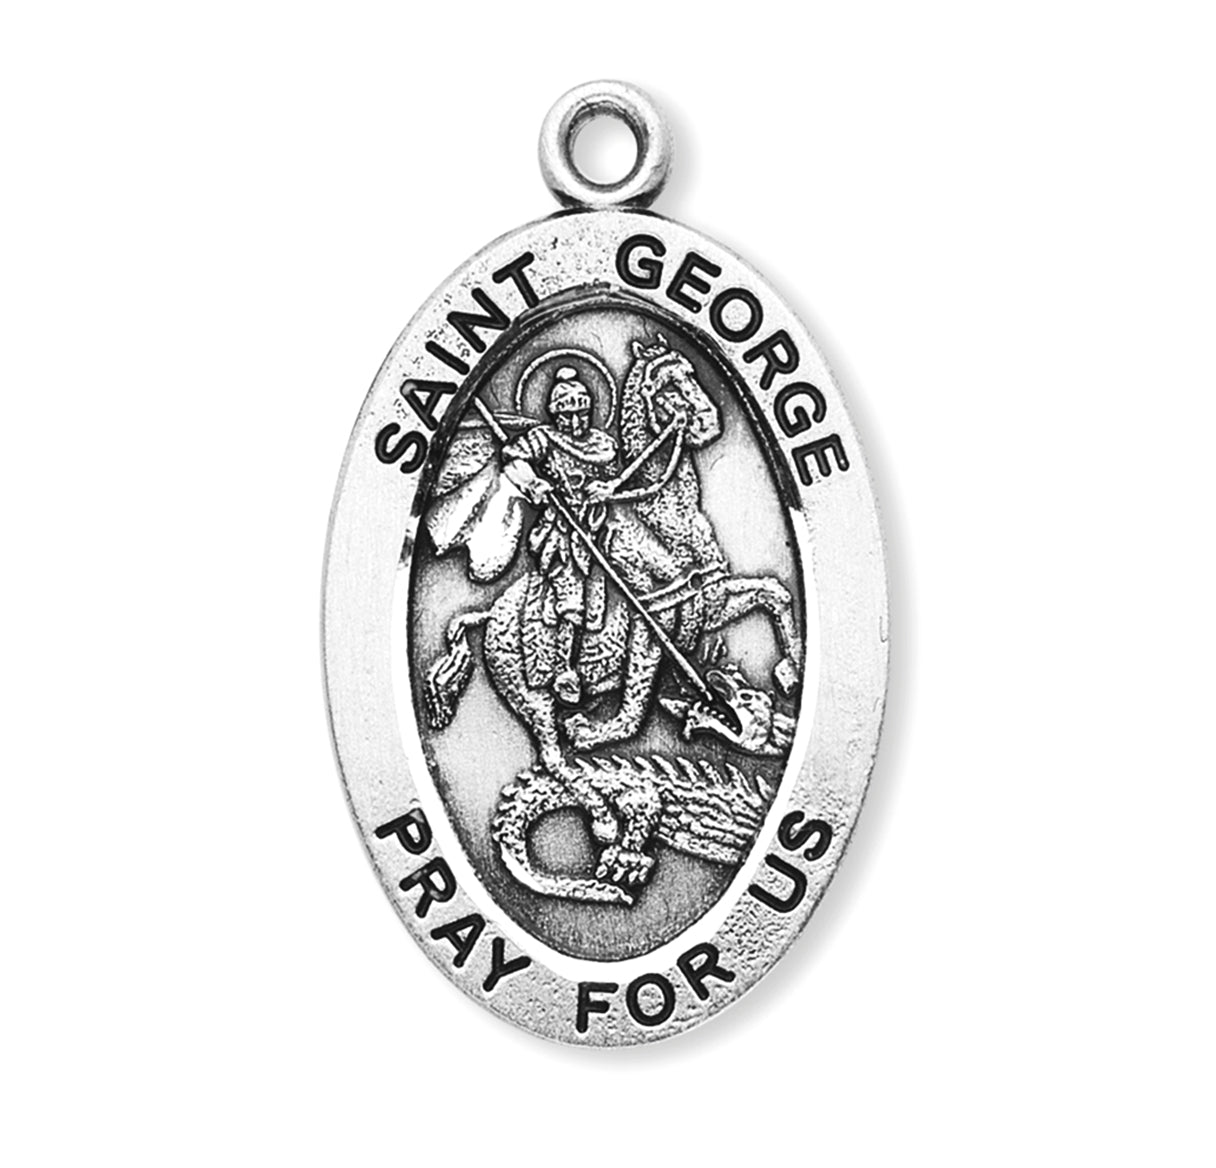 St. George Sterling Silver Medal Necklace